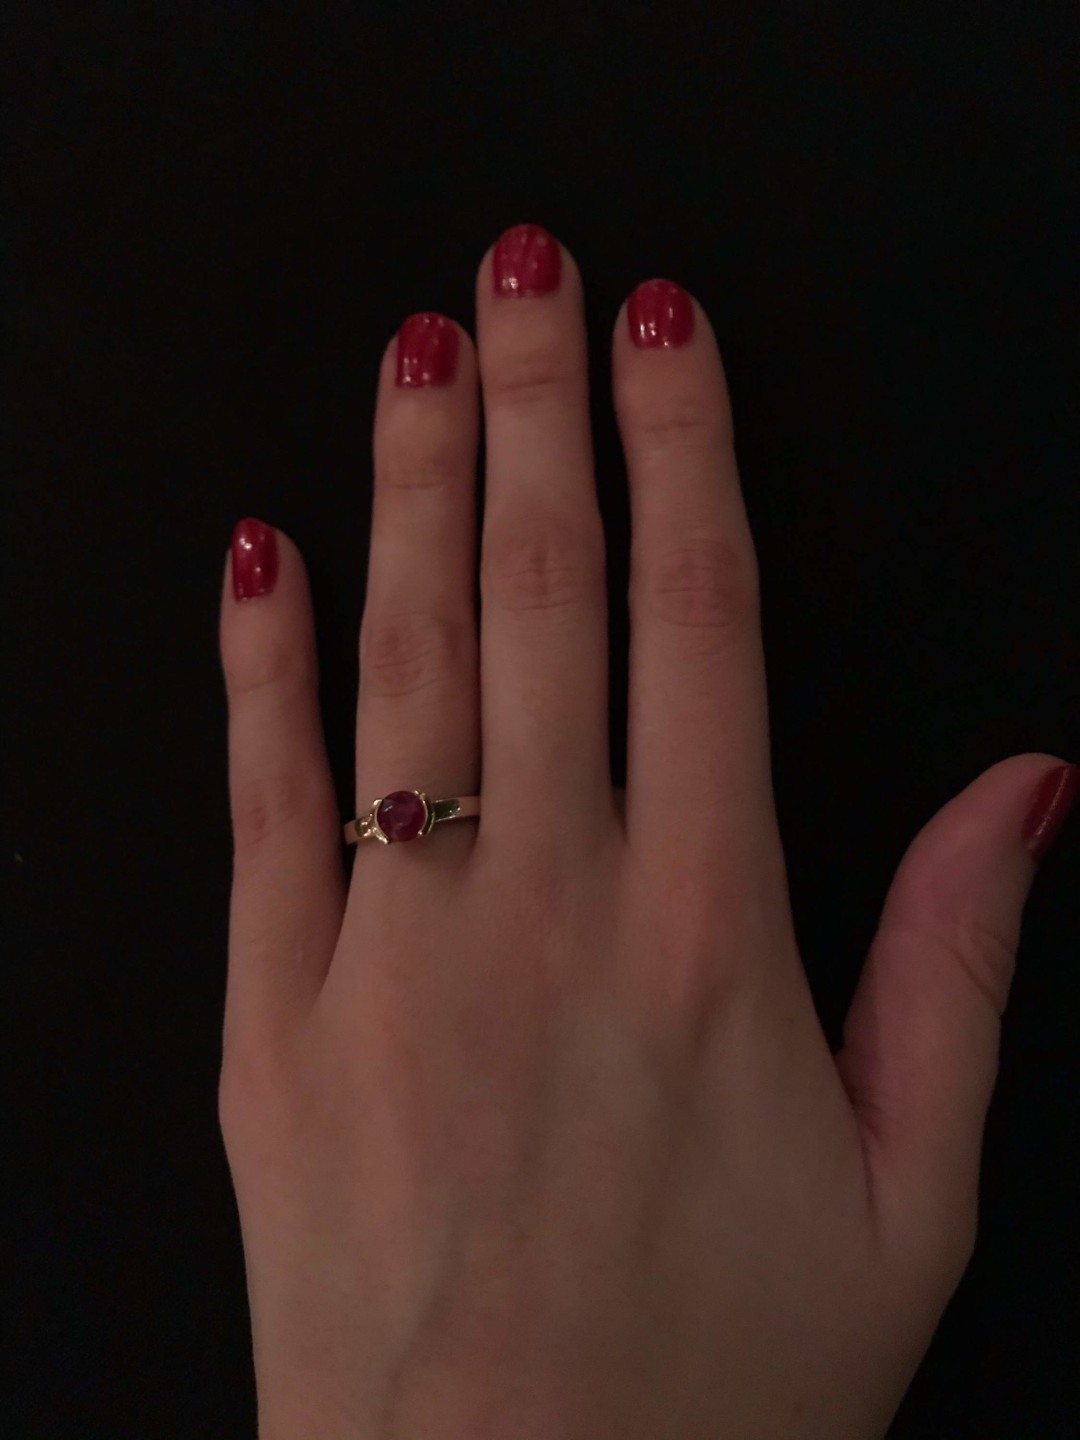 Shelby's hand with a ring on it